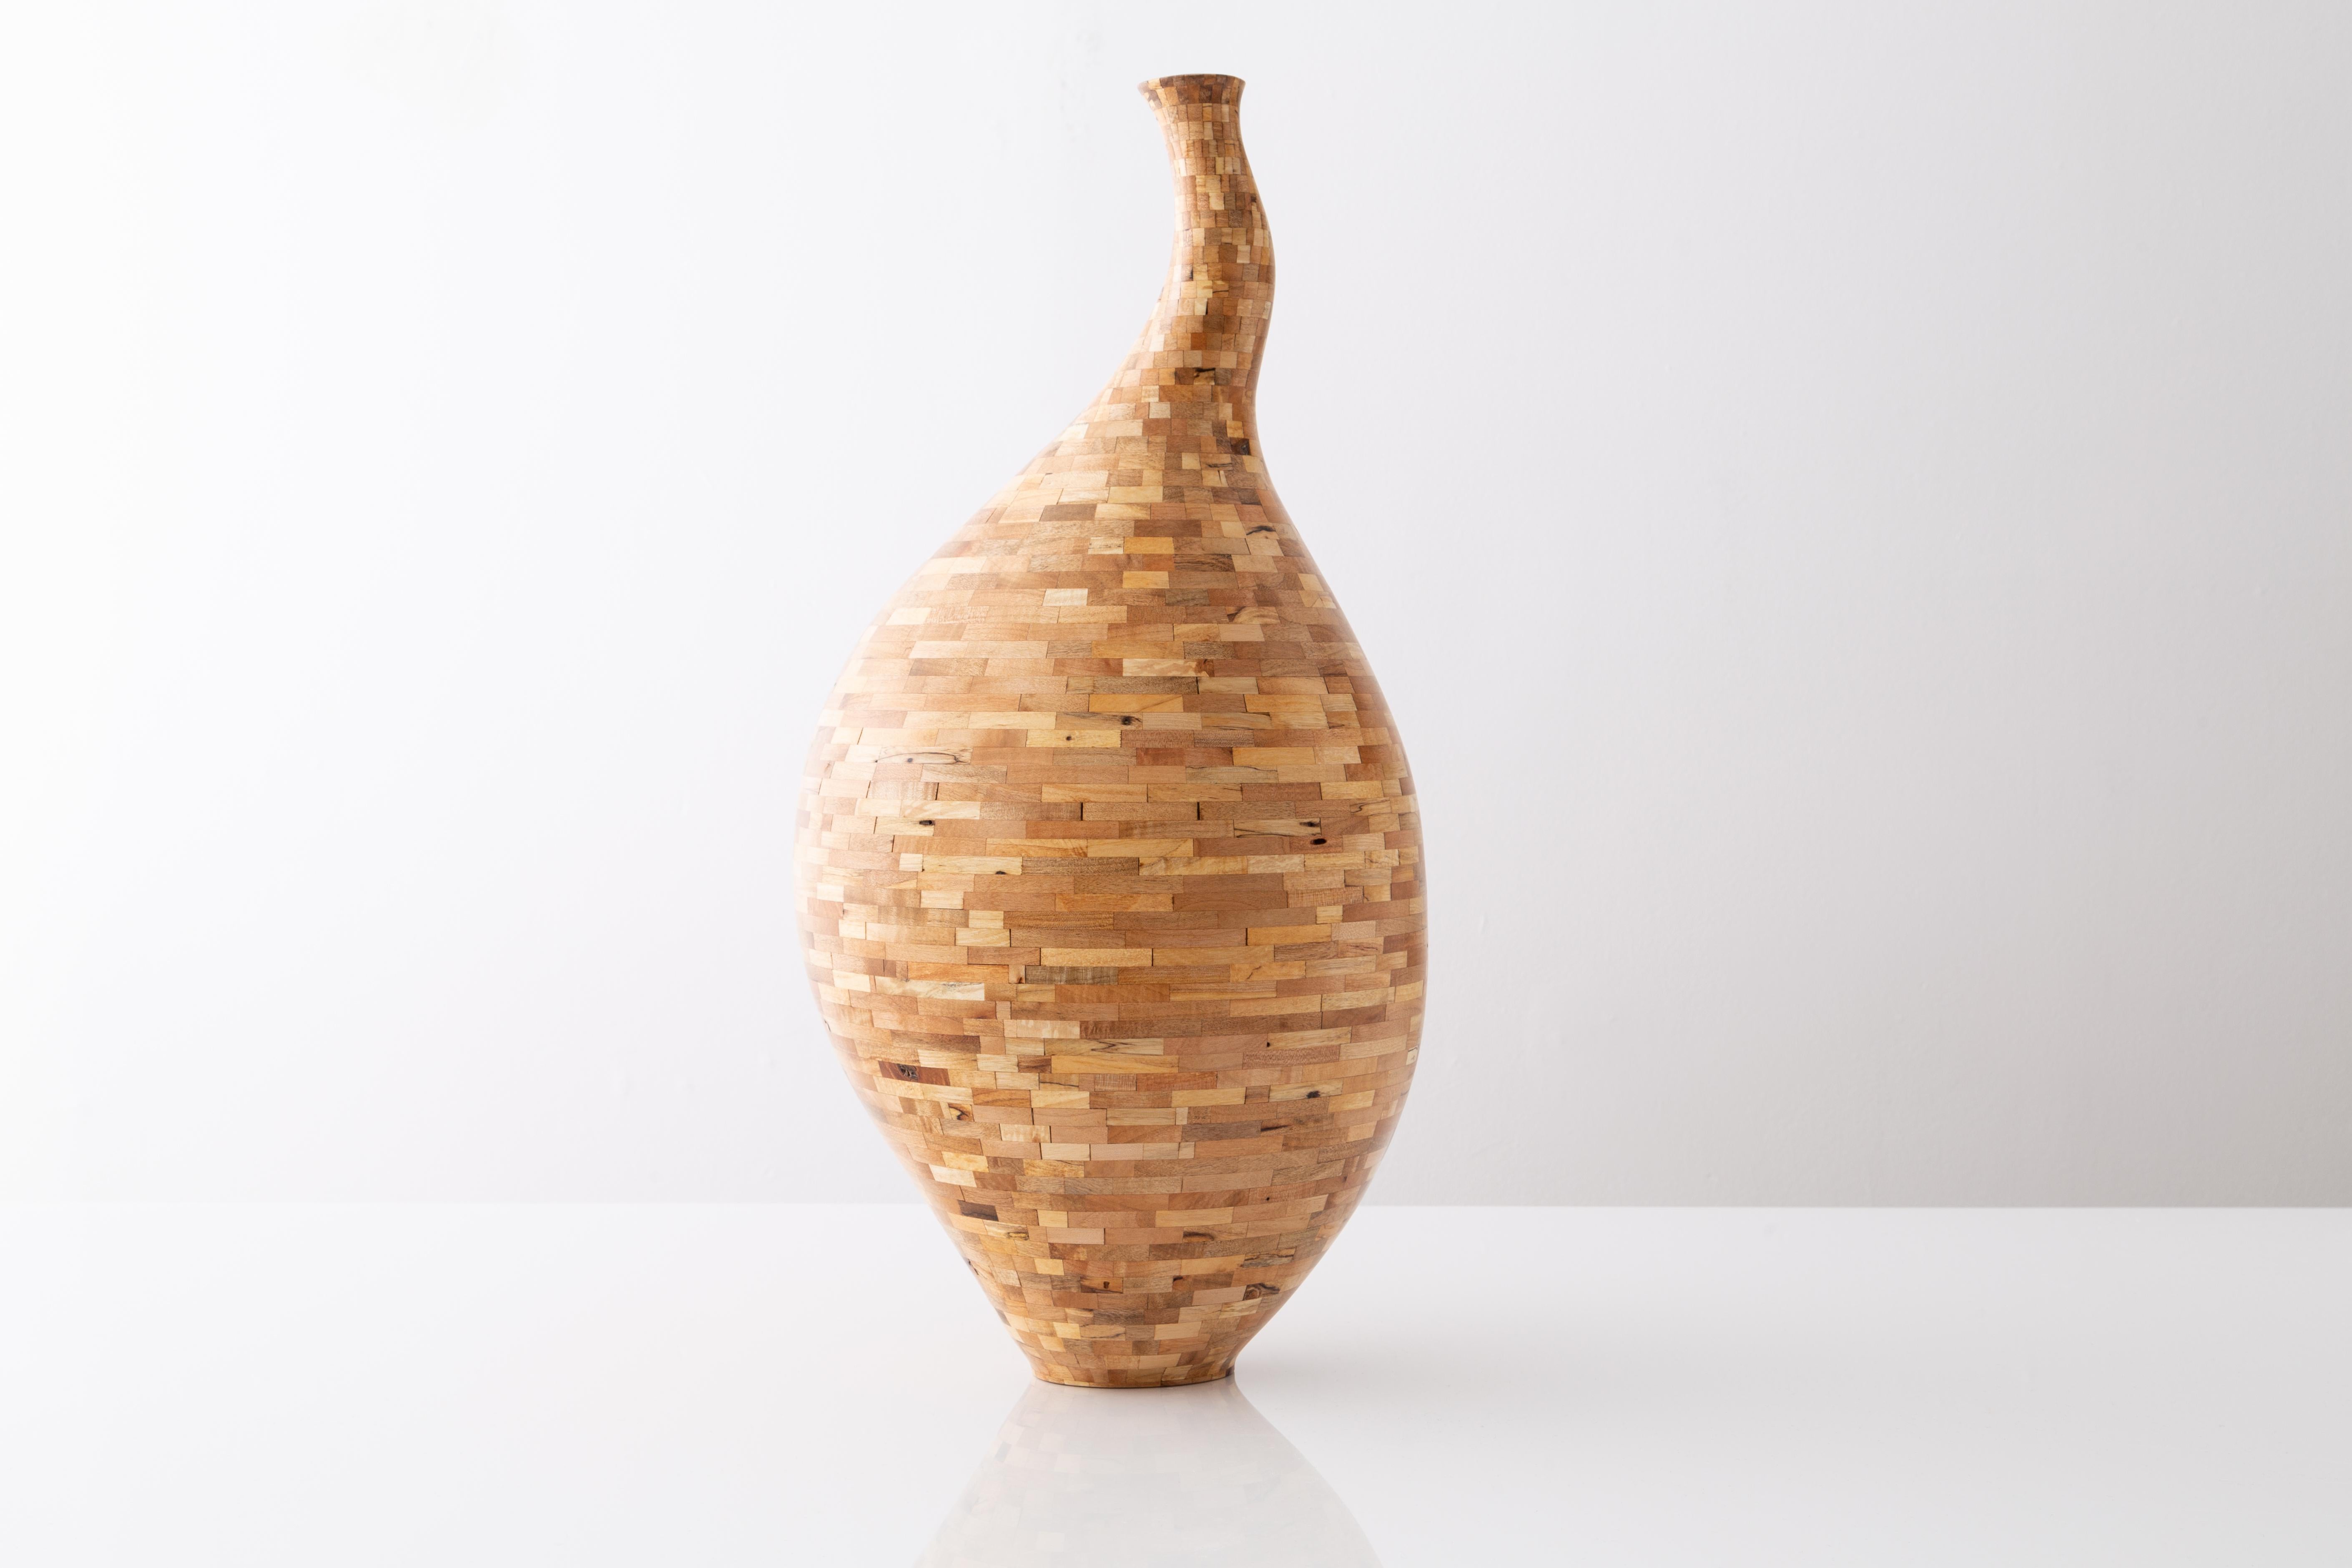 Modern Contemporary Spalted Maple Goose Neck Vase #1 by Richard Haining, Available Now